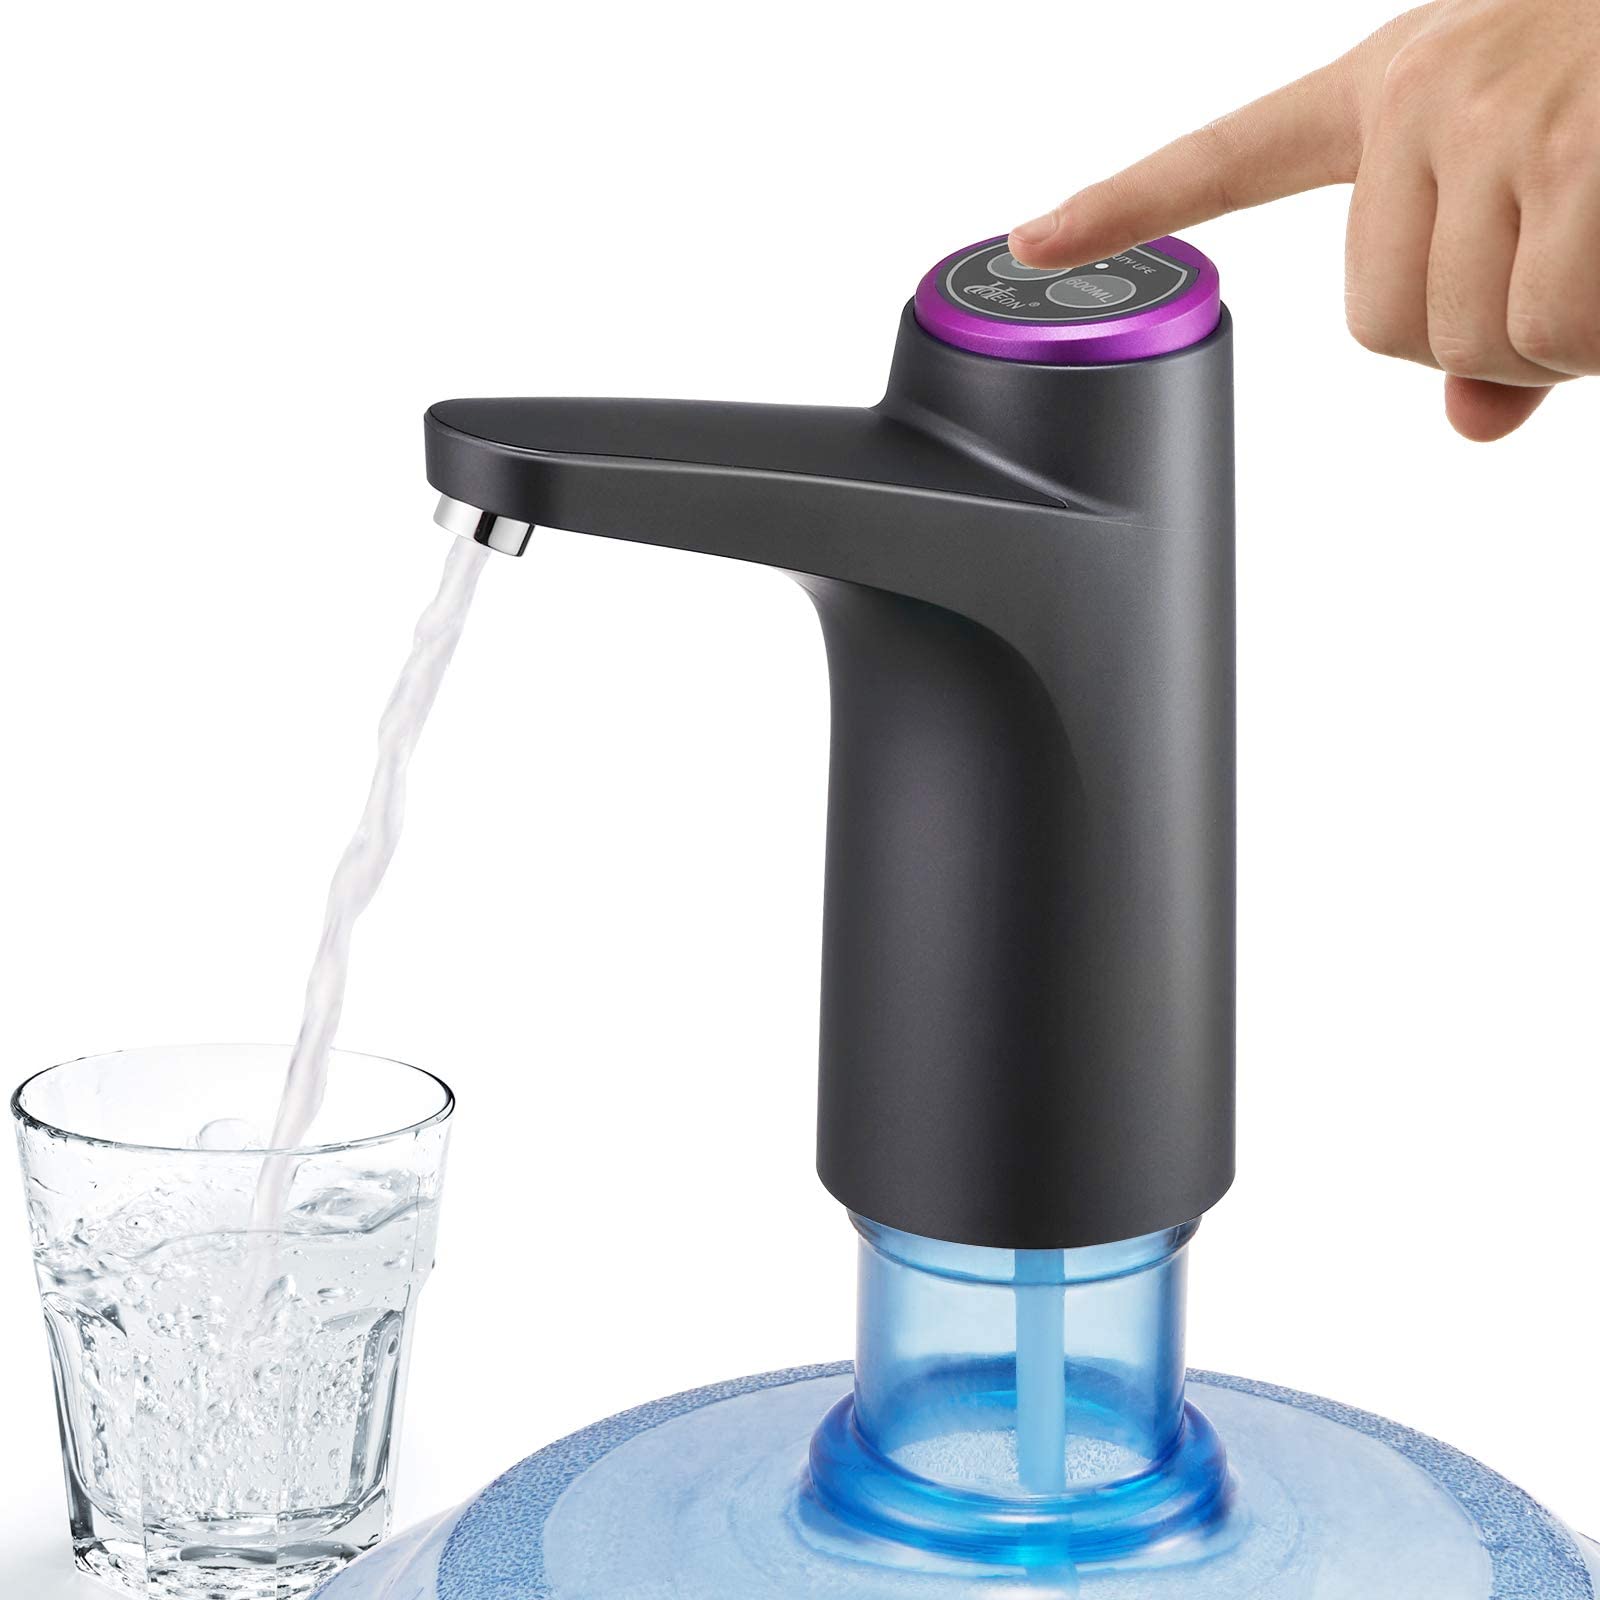 VIO Automatic Water Dispenser Pump for Drinking Water Can, with Rechargeable Battery, Hassle-Free, Easy Clean, Avoid Bacterial Retention and Portable Water Pump for Home (black)